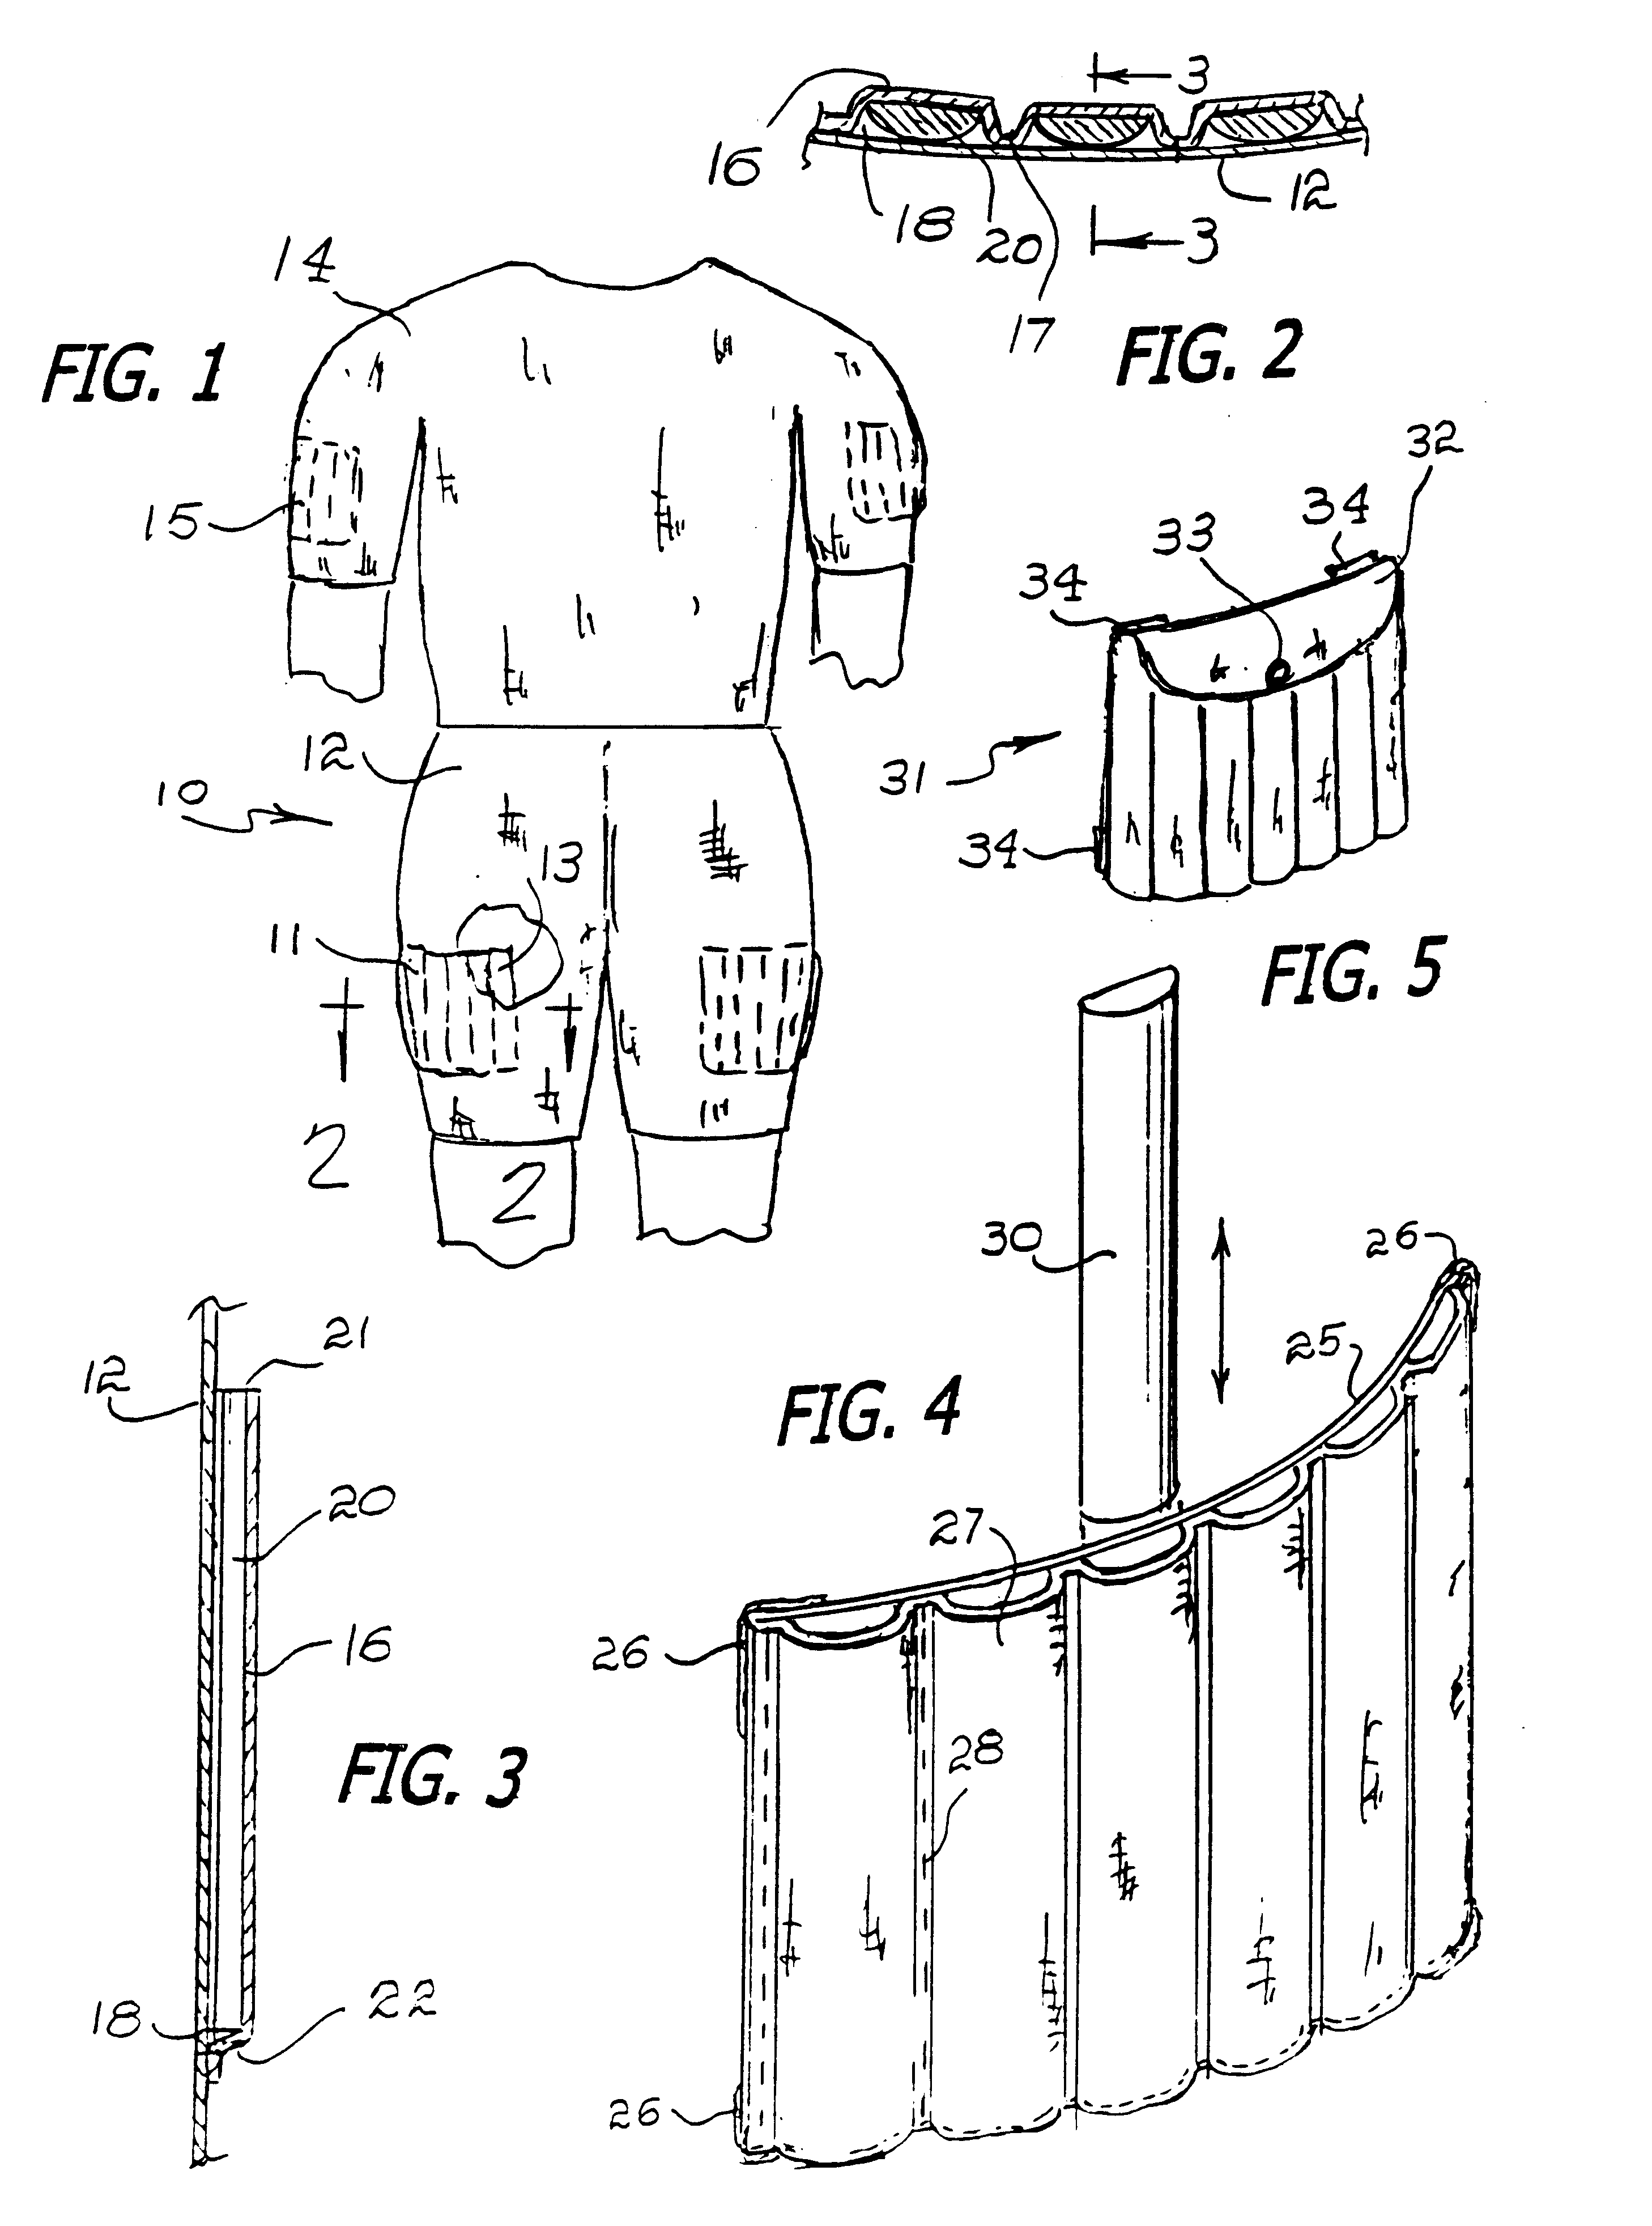 Weighted accessory for garments